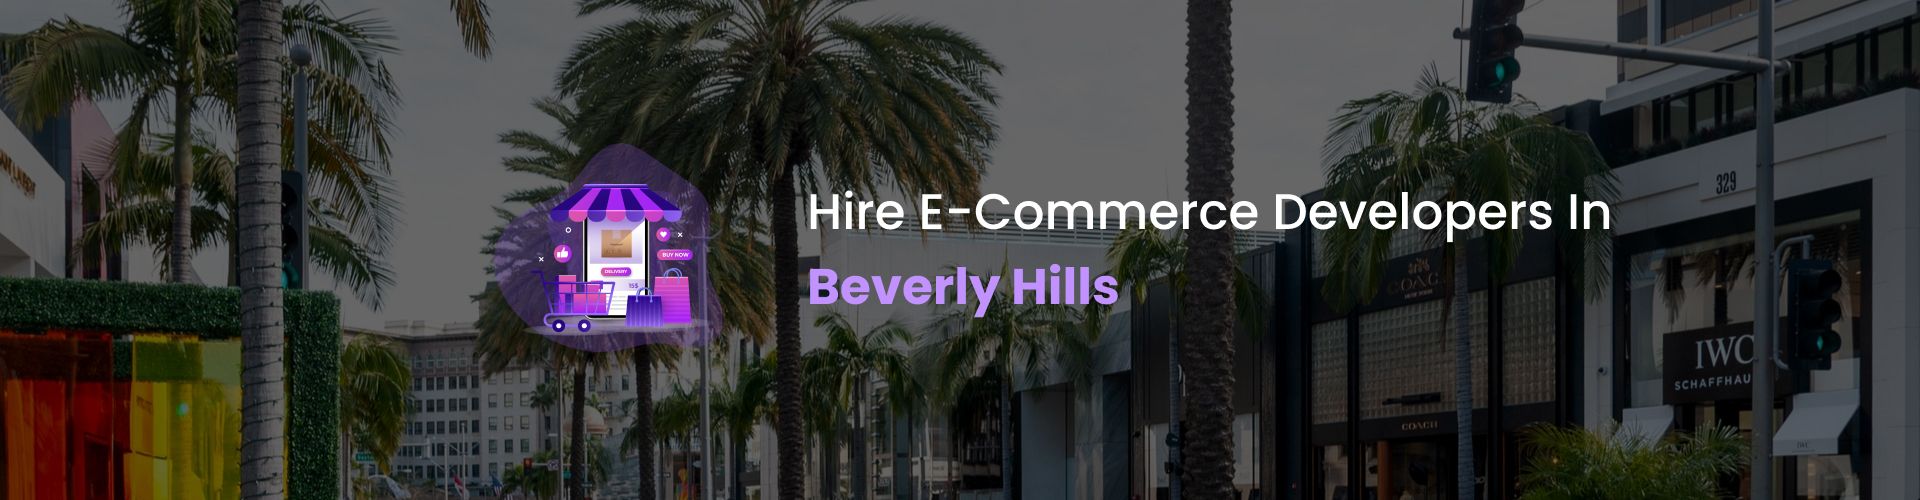 ecommerce developers beverly hills